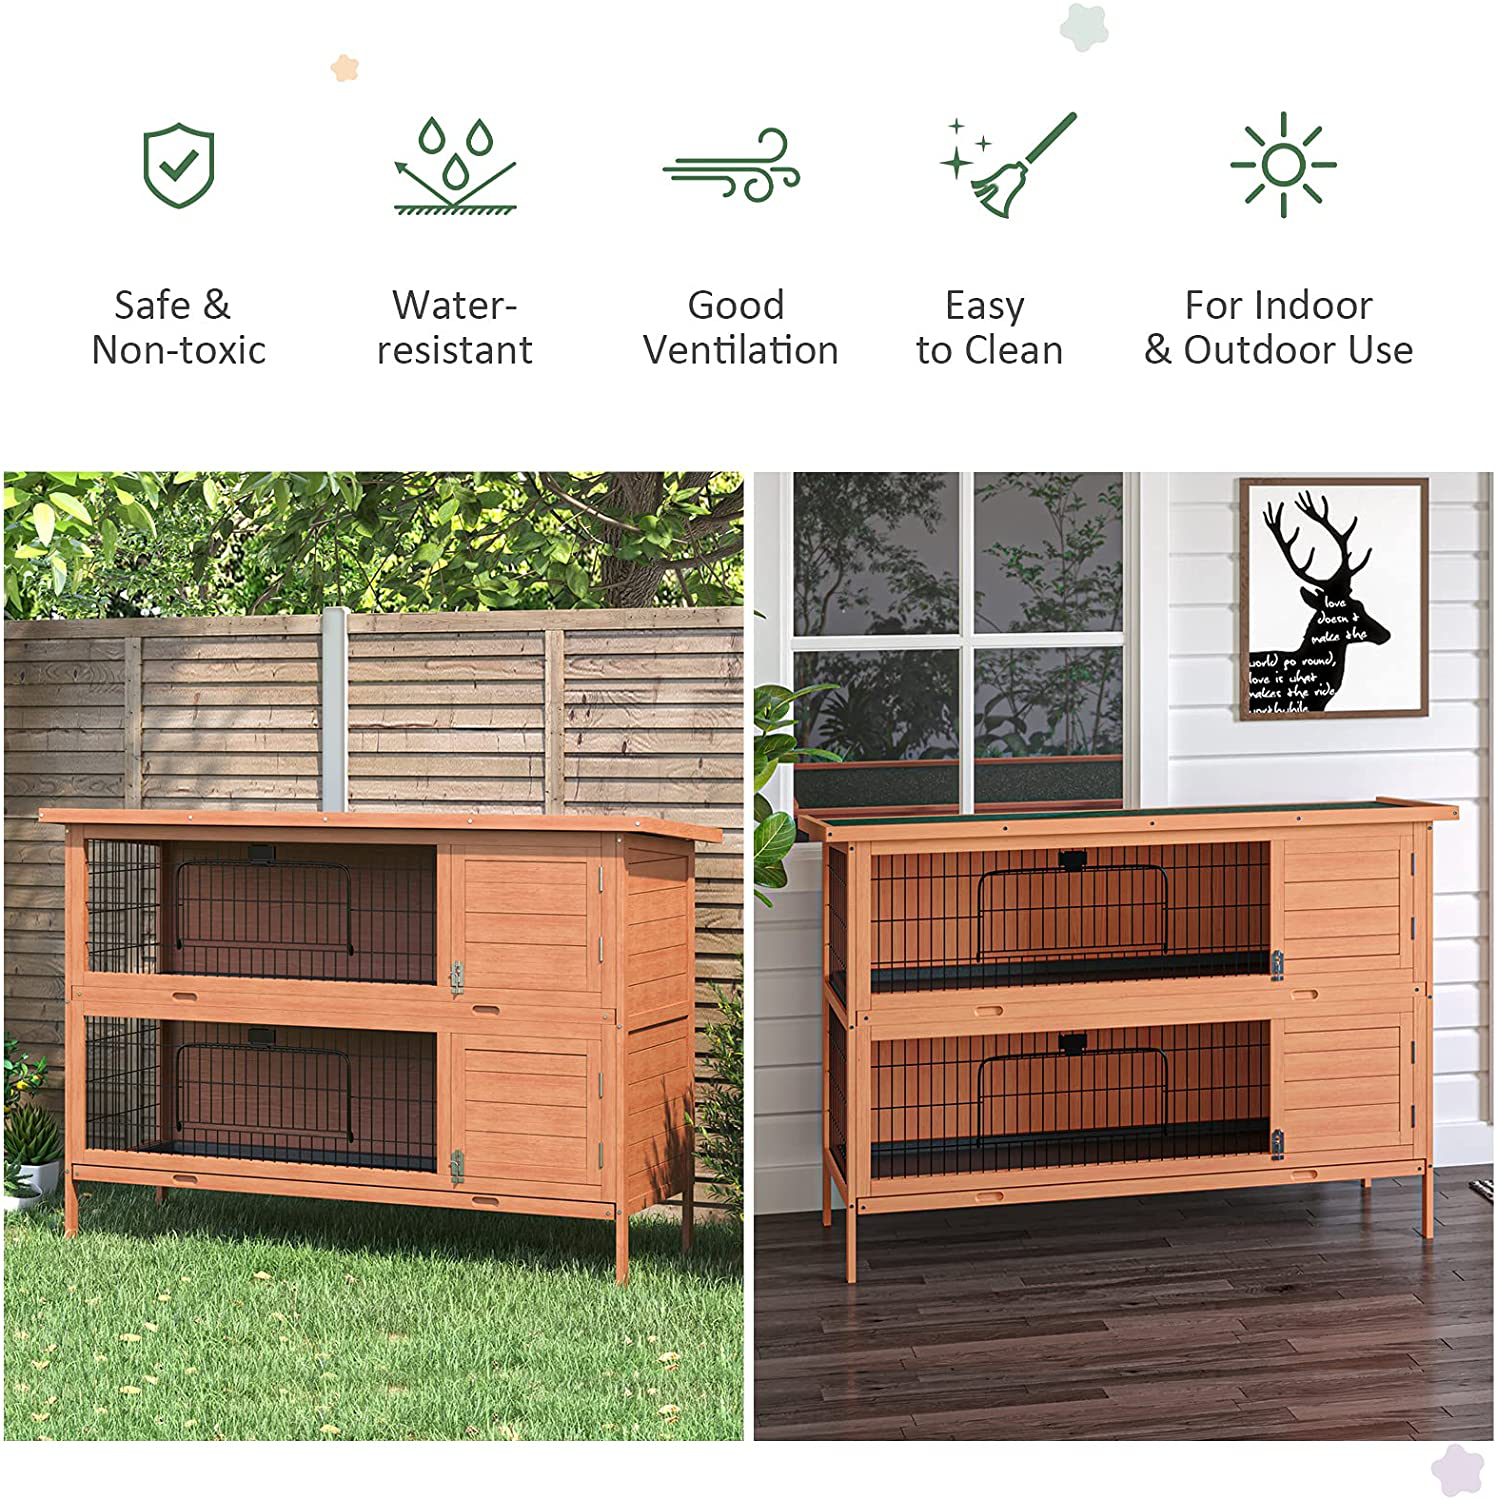 Pawhut 54" 2-Floor Large Rabbit Hutch Wooden Pet House Bunny Cage Small Animal Habitat with Lockable Doors Run Asphalt Roof for Outdoor Use